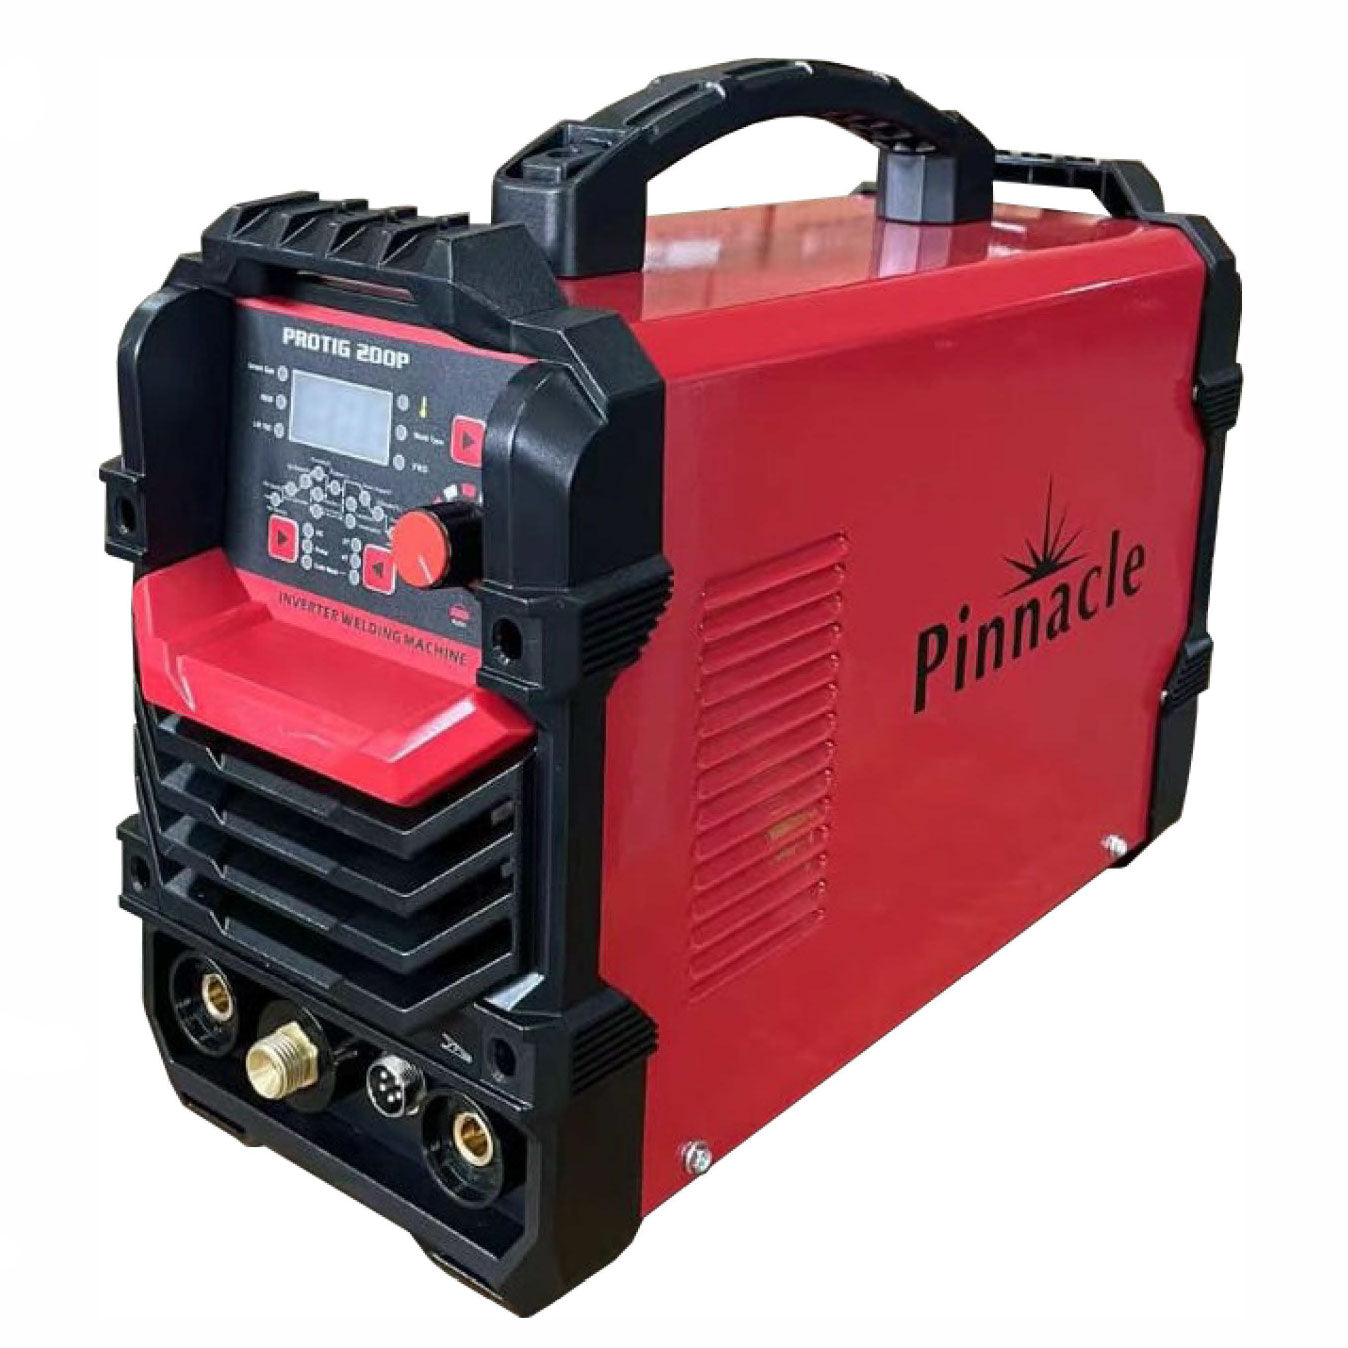 Compact and powerful Pinnacle PROTIG 200P DC TIG Welding Machine on white background, showcasing its advanced IGBT technology and user-friendly interface, ideal for professional and DIY welding tasks in South Africa.